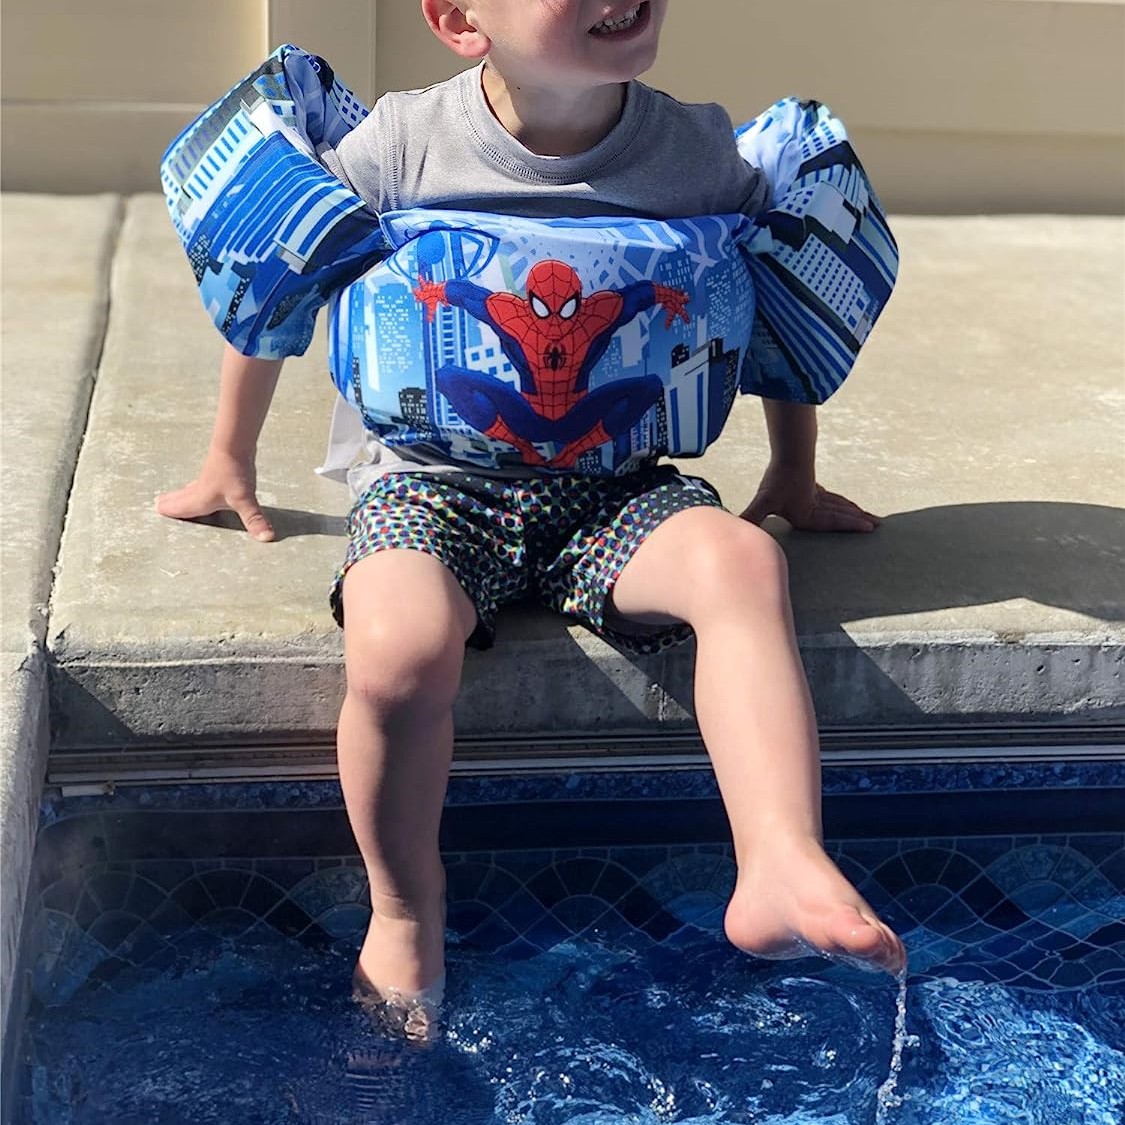 Toddler Kids Swim Vest with Arm Wings Floats Life Jacket